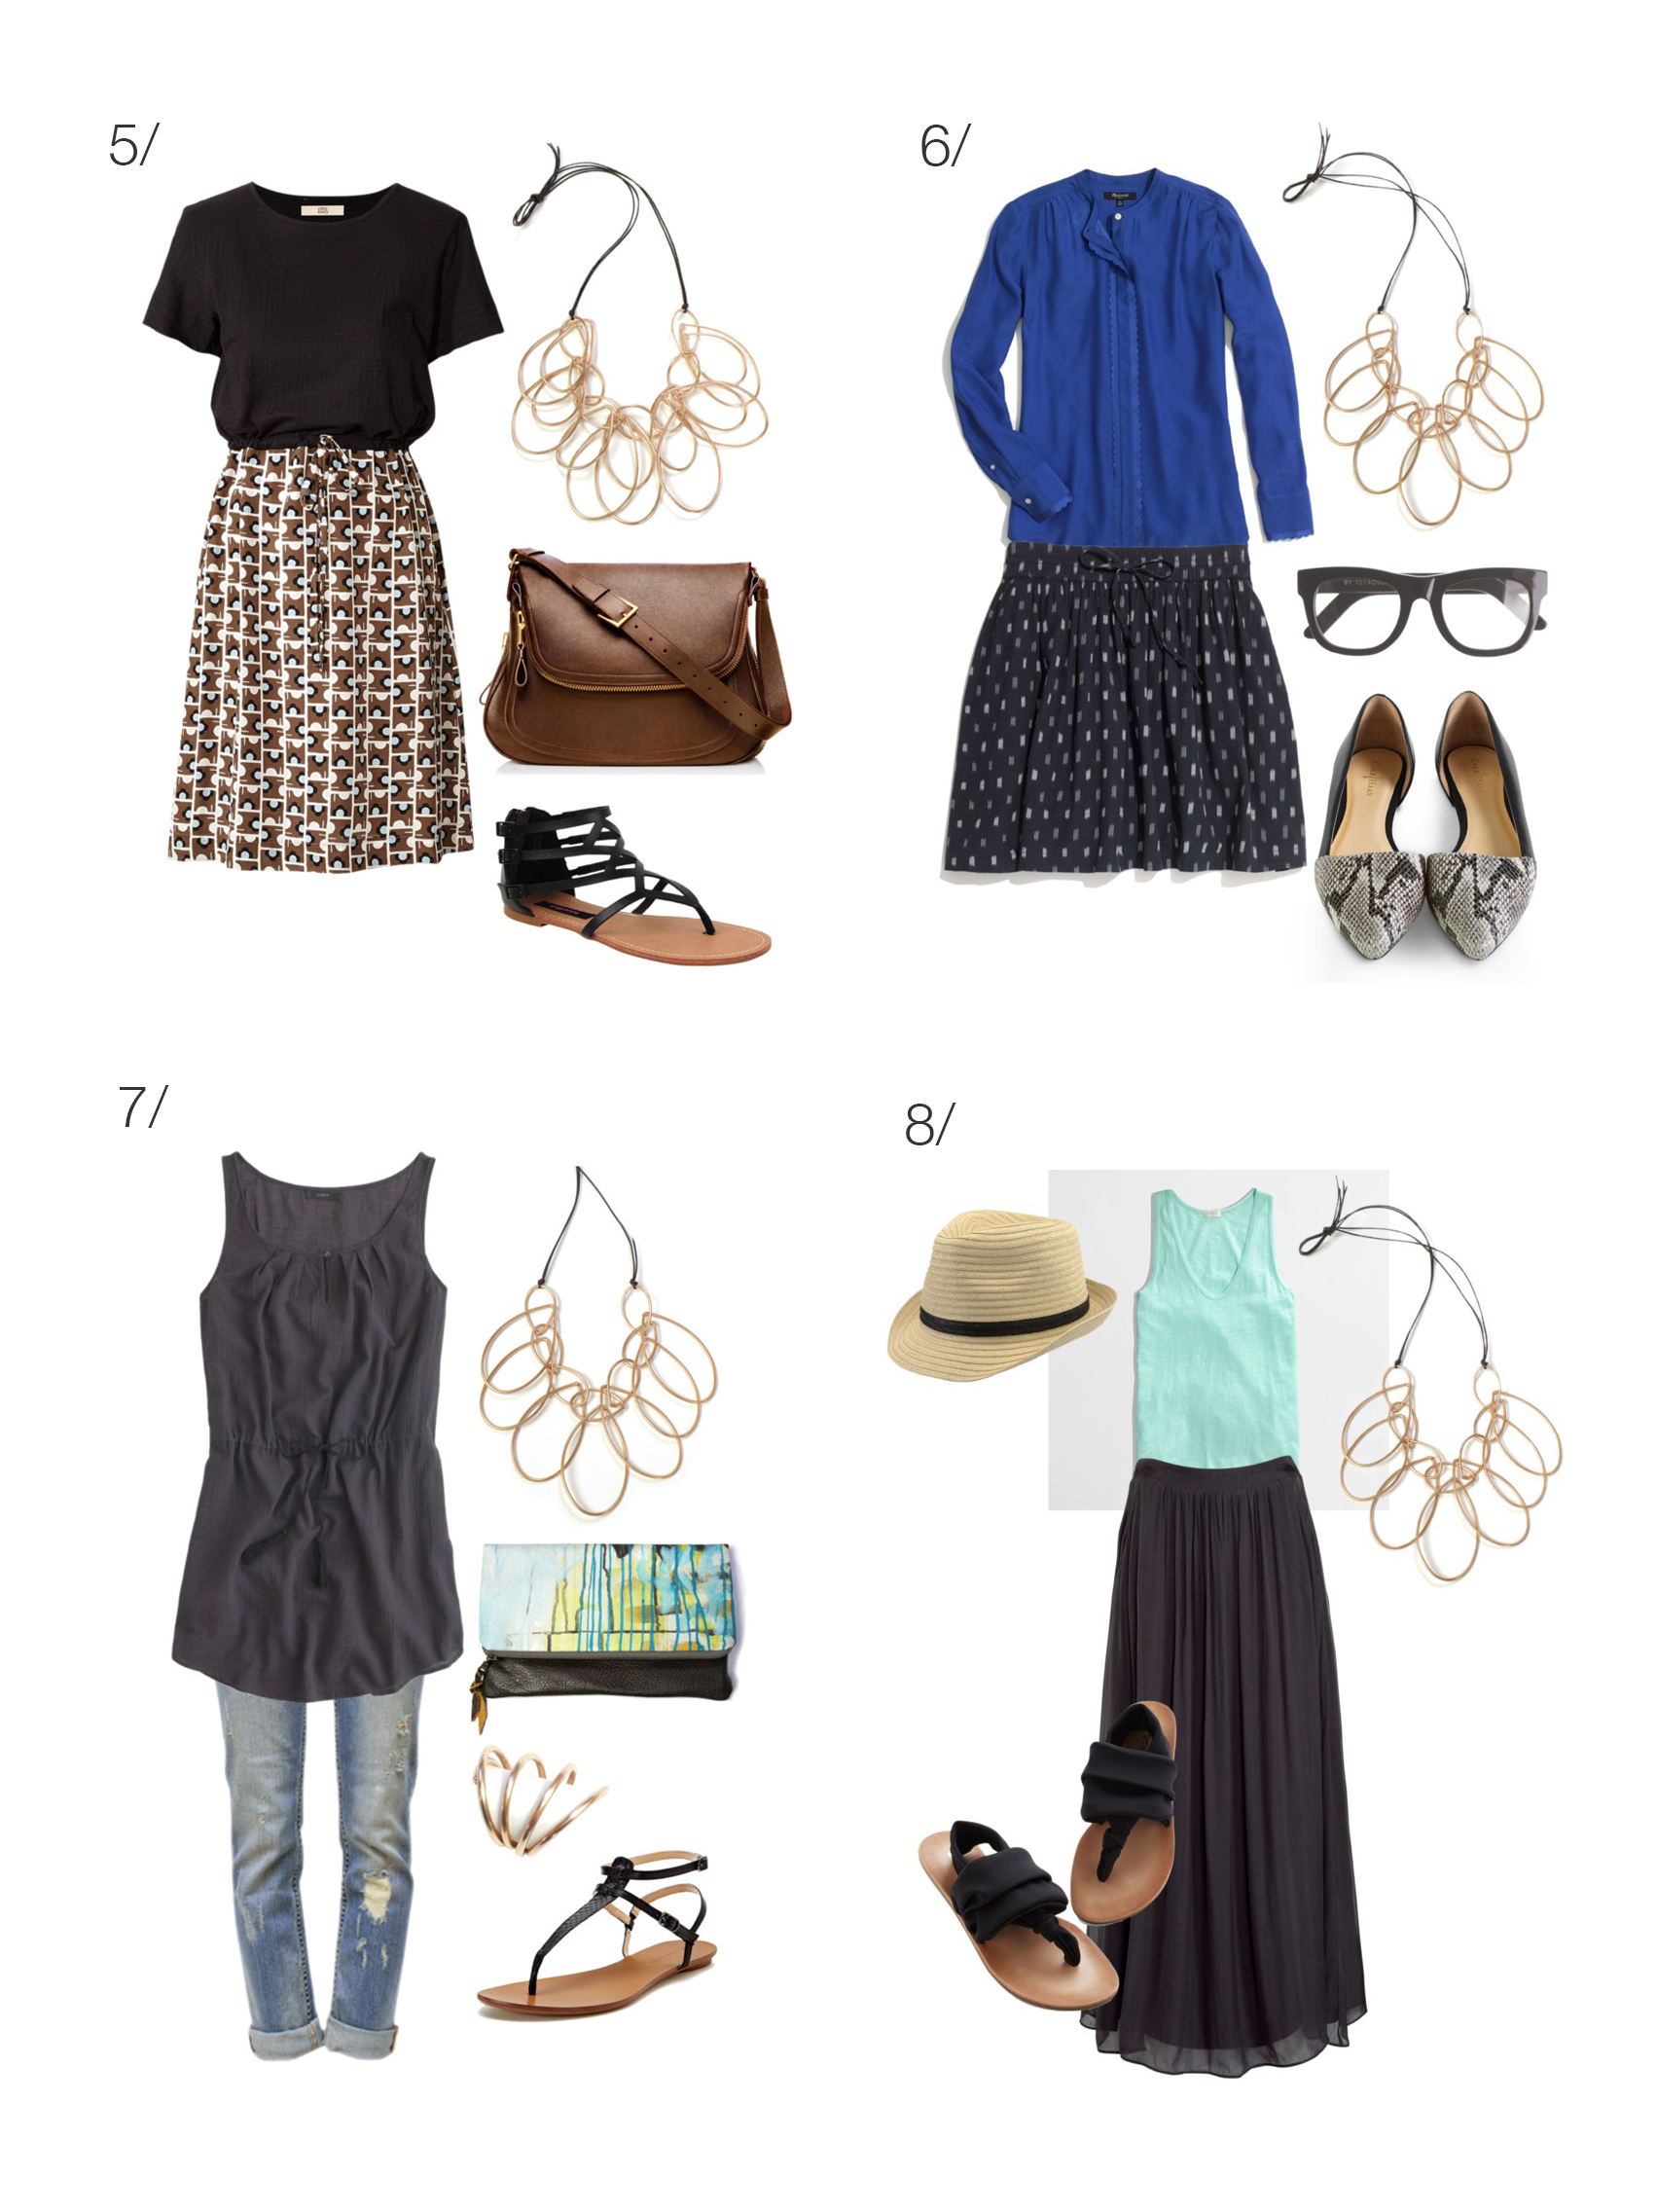 how to wear a statement necklace in summer: 8 outfit ideas to try // click for outfit details